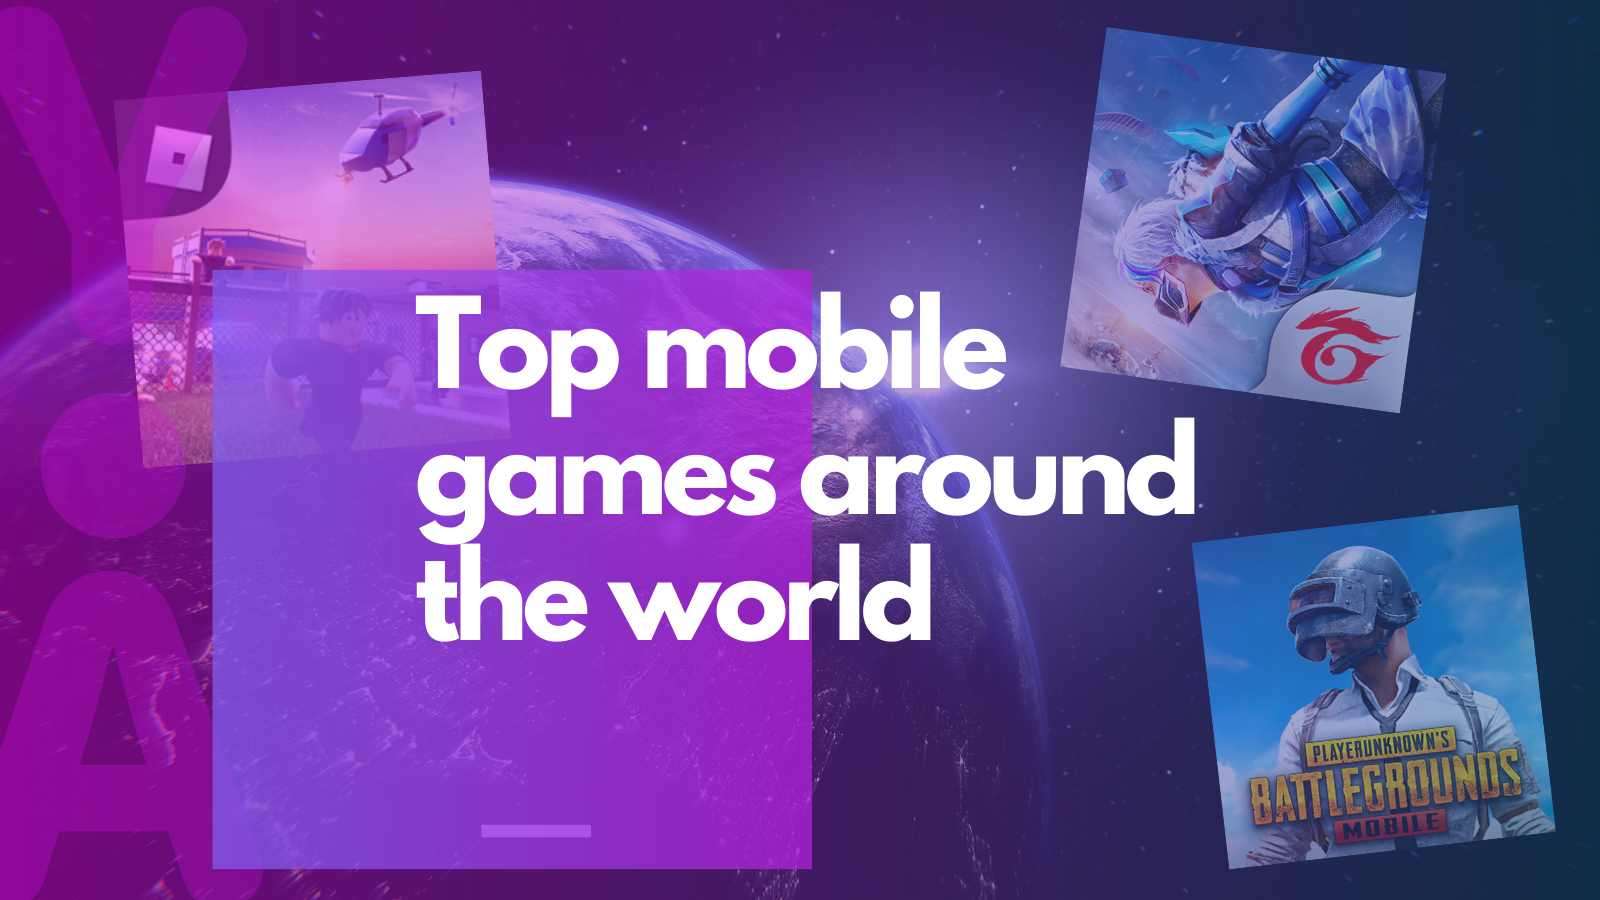 WORLD OF MOBILE GAMES